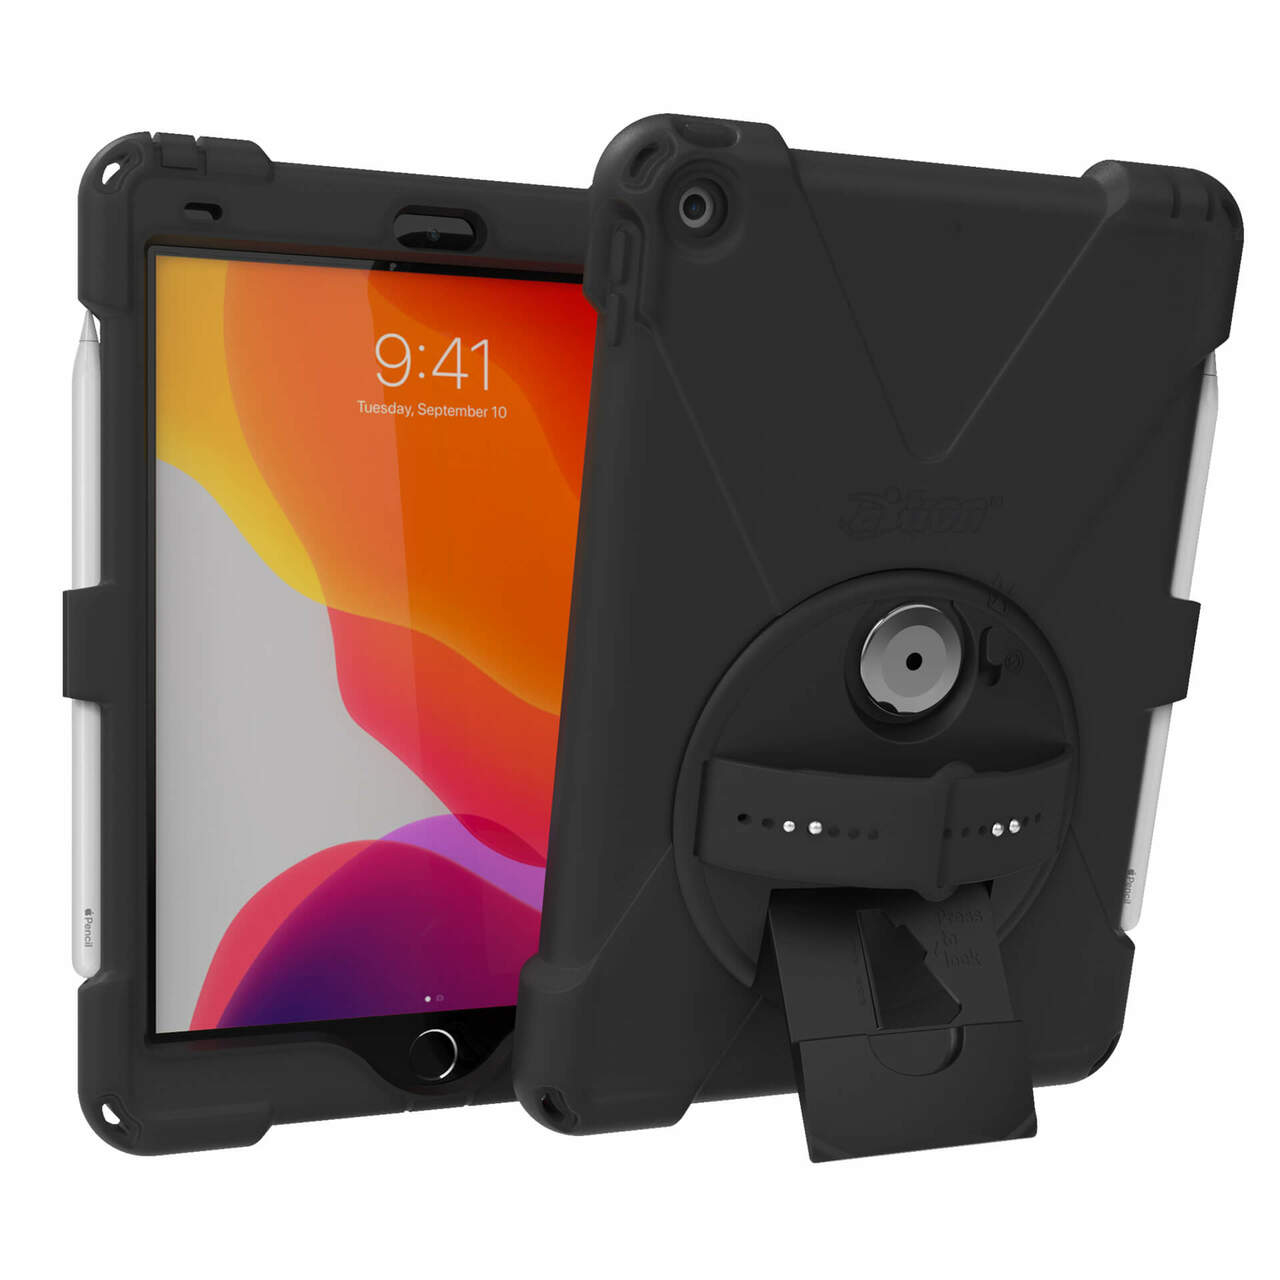 iPad PRO 12.9 5th generation - WaterProof and Shockproof Case